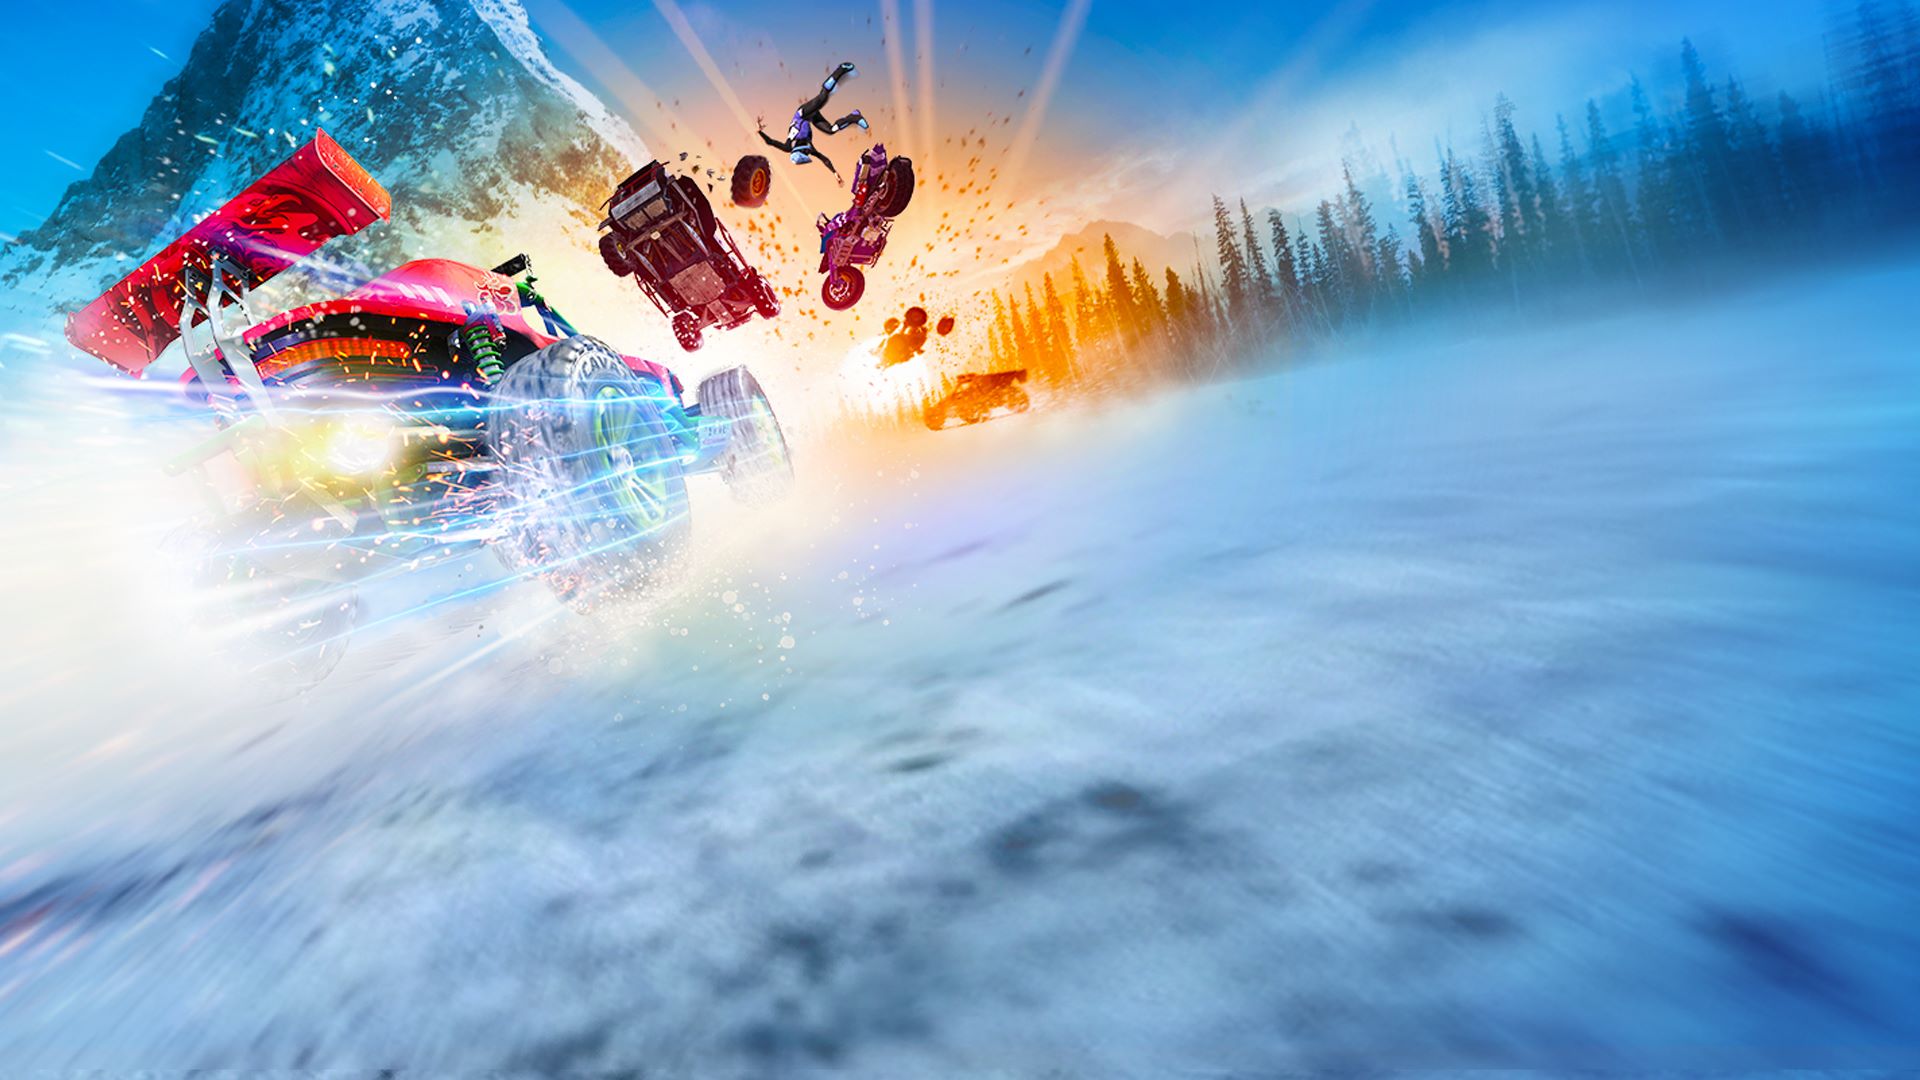 Play OnRush free for a limited time